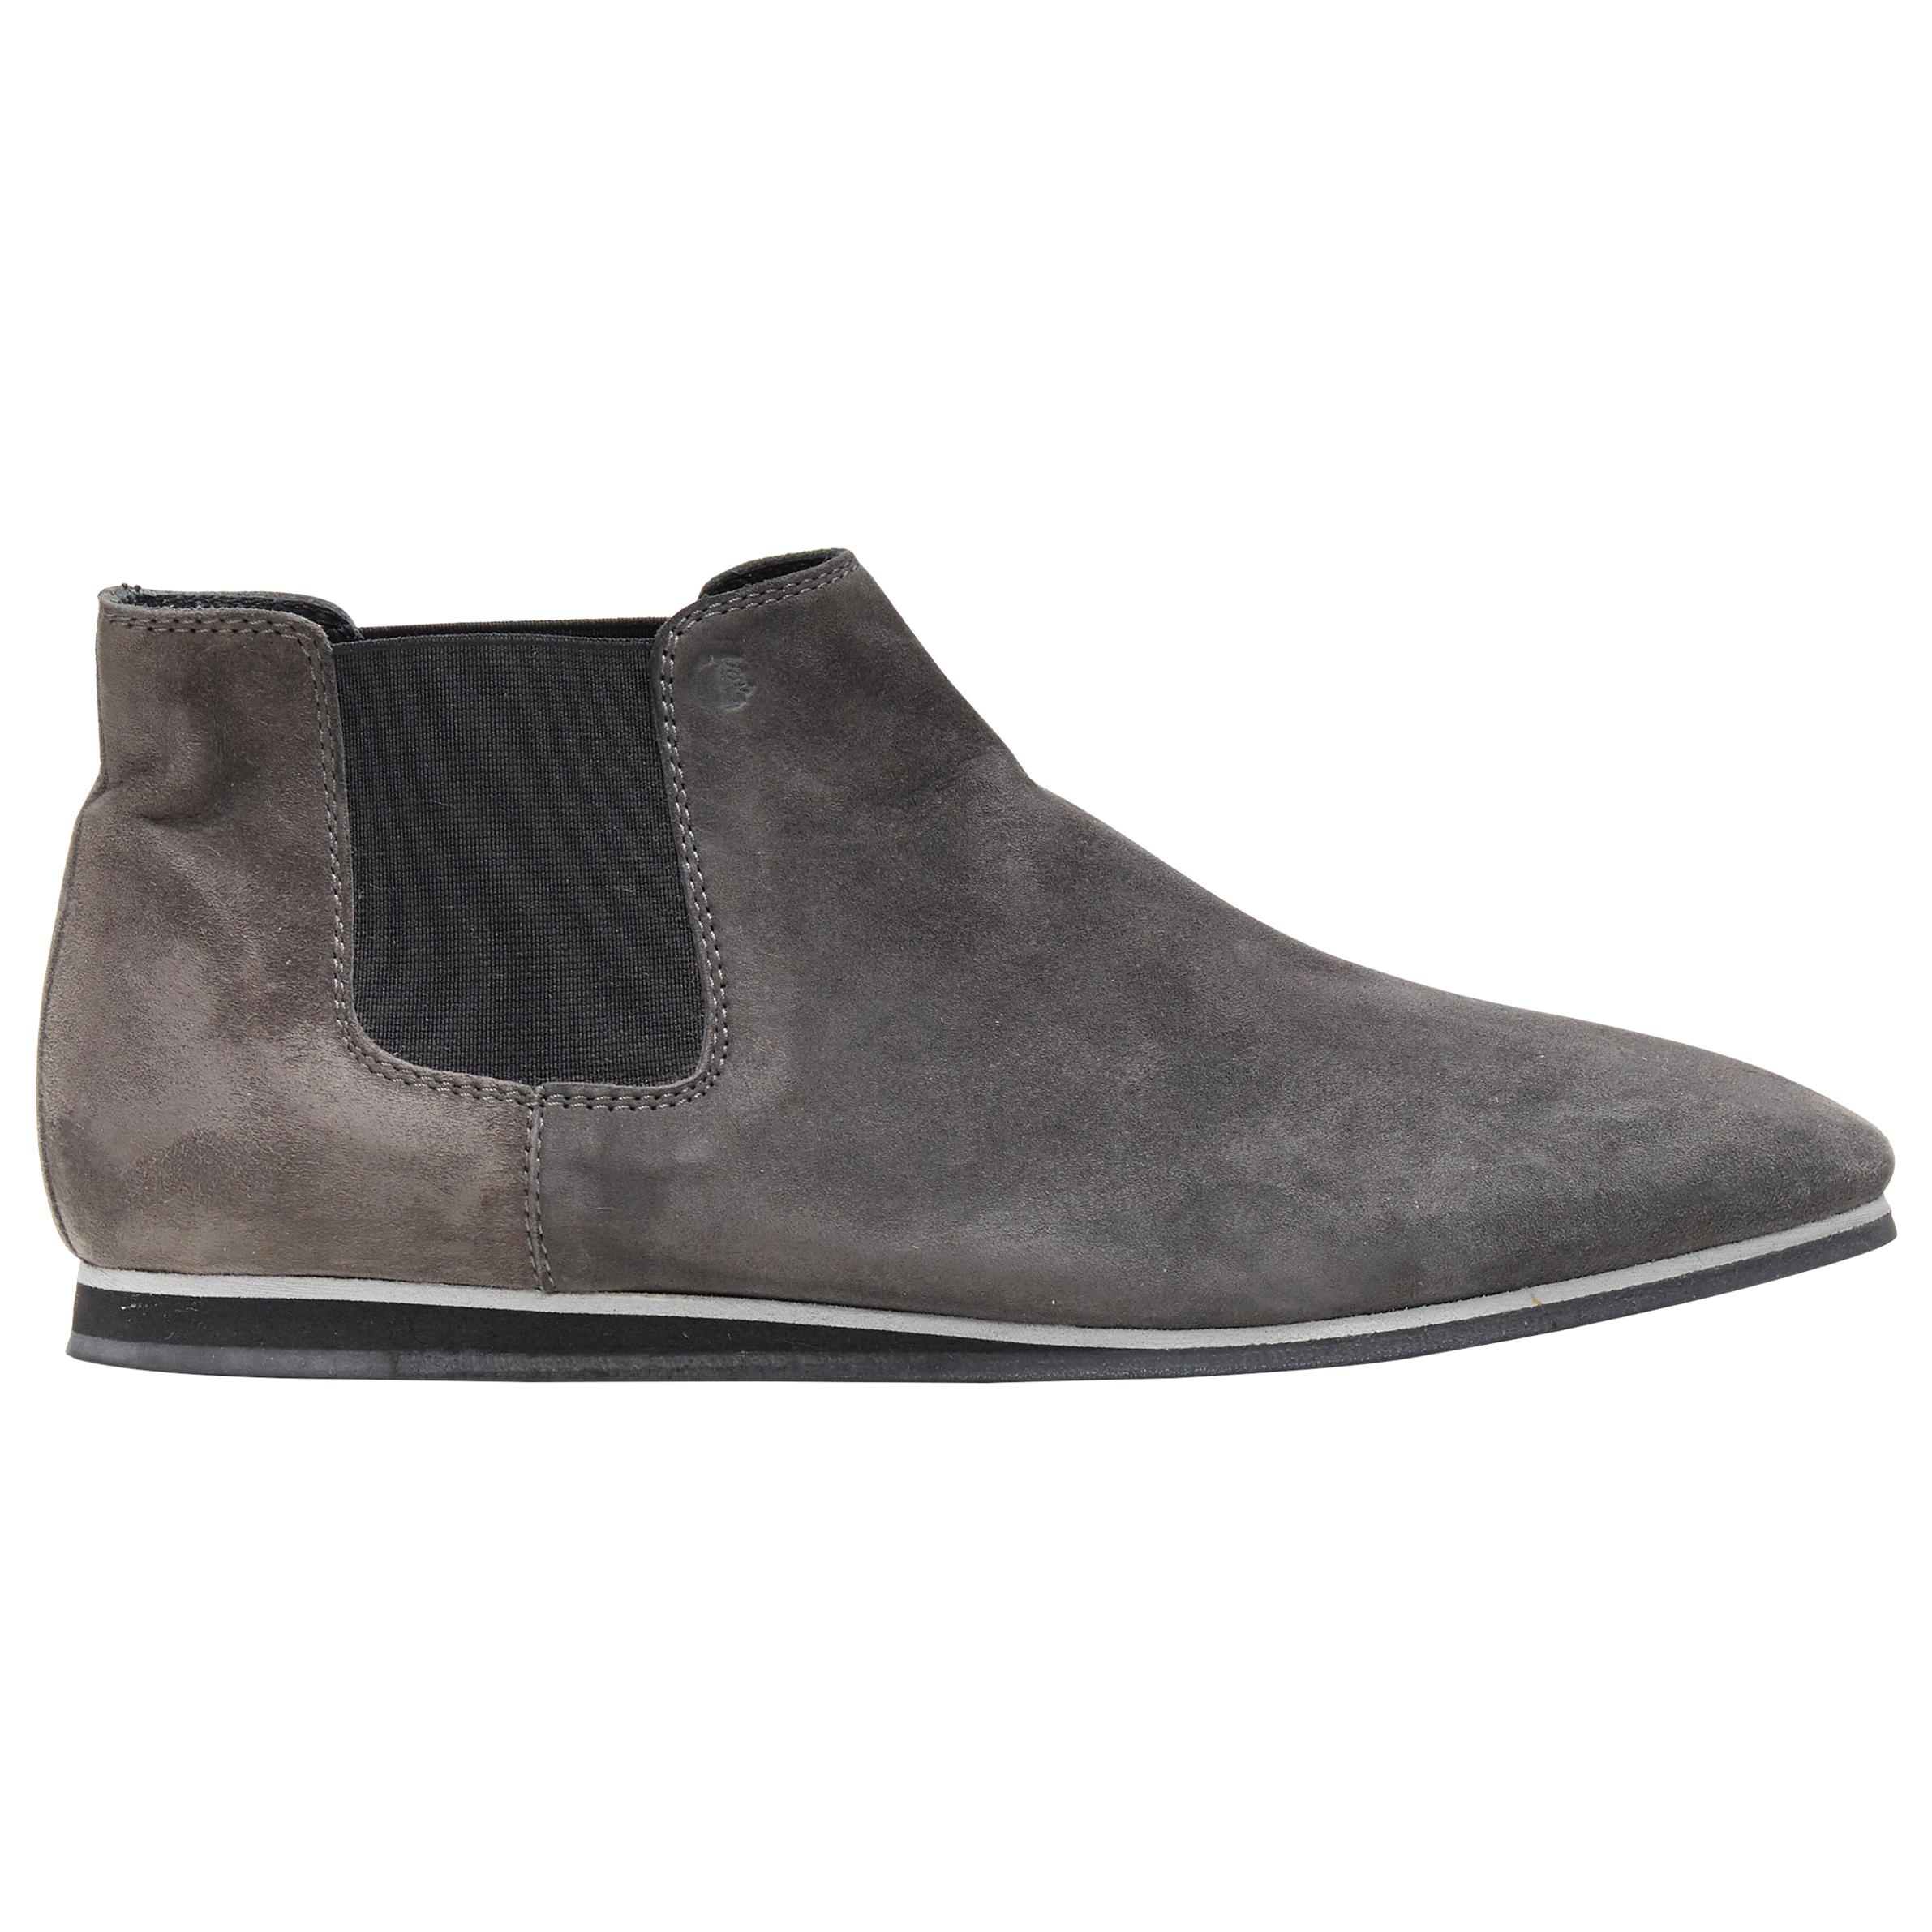 TOD'S No Code dark grey suede elastic gusset round toe flat ankle bootie EU37 For Sale